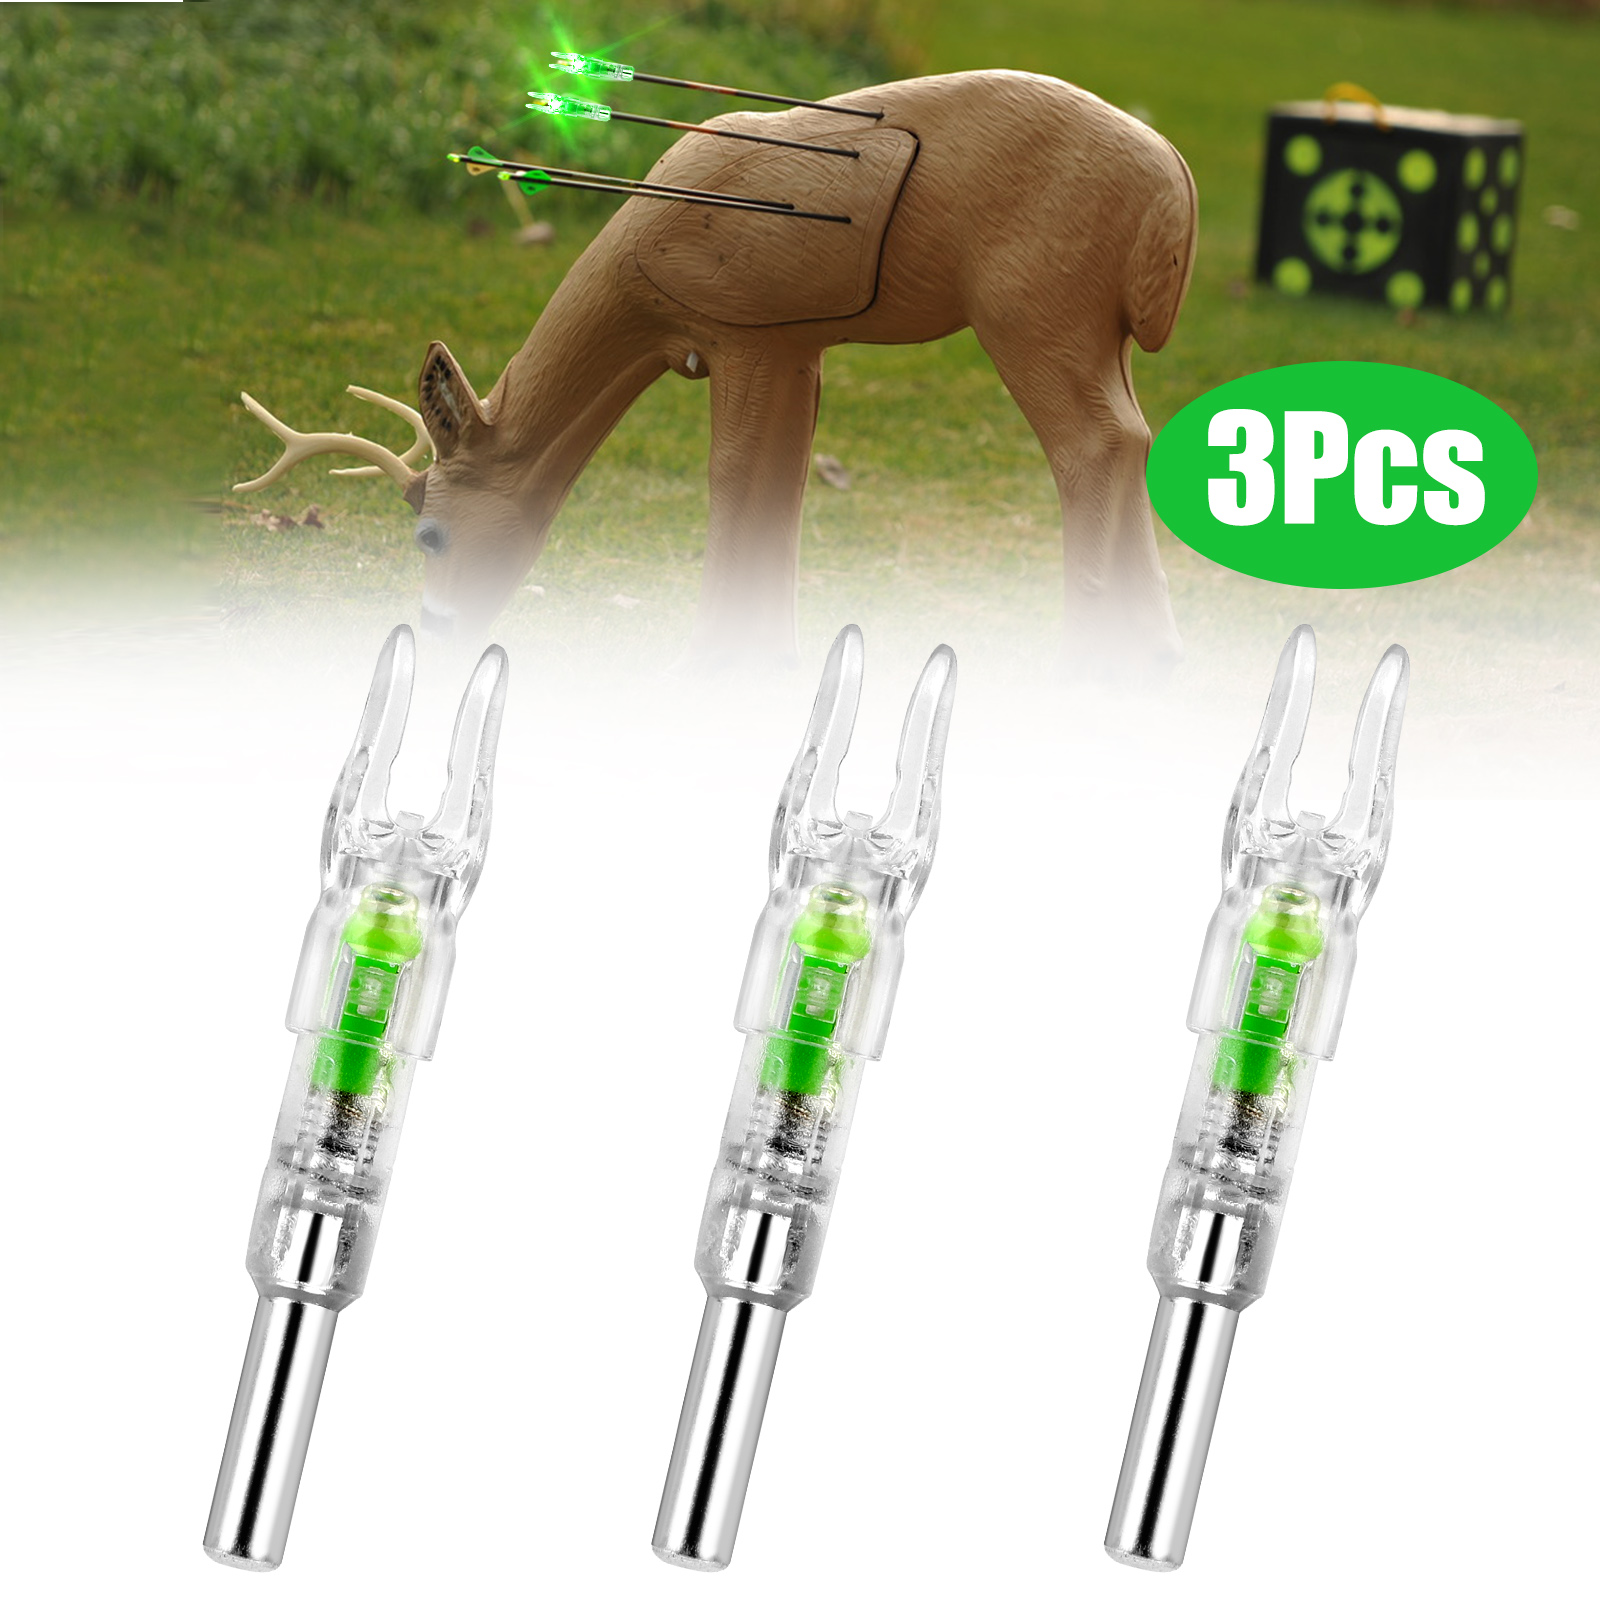 3pcs Hunting Shooting Auto Lighted Bow LED Arrow Nock Tail Fit 6.2mm Arrow Shaft 